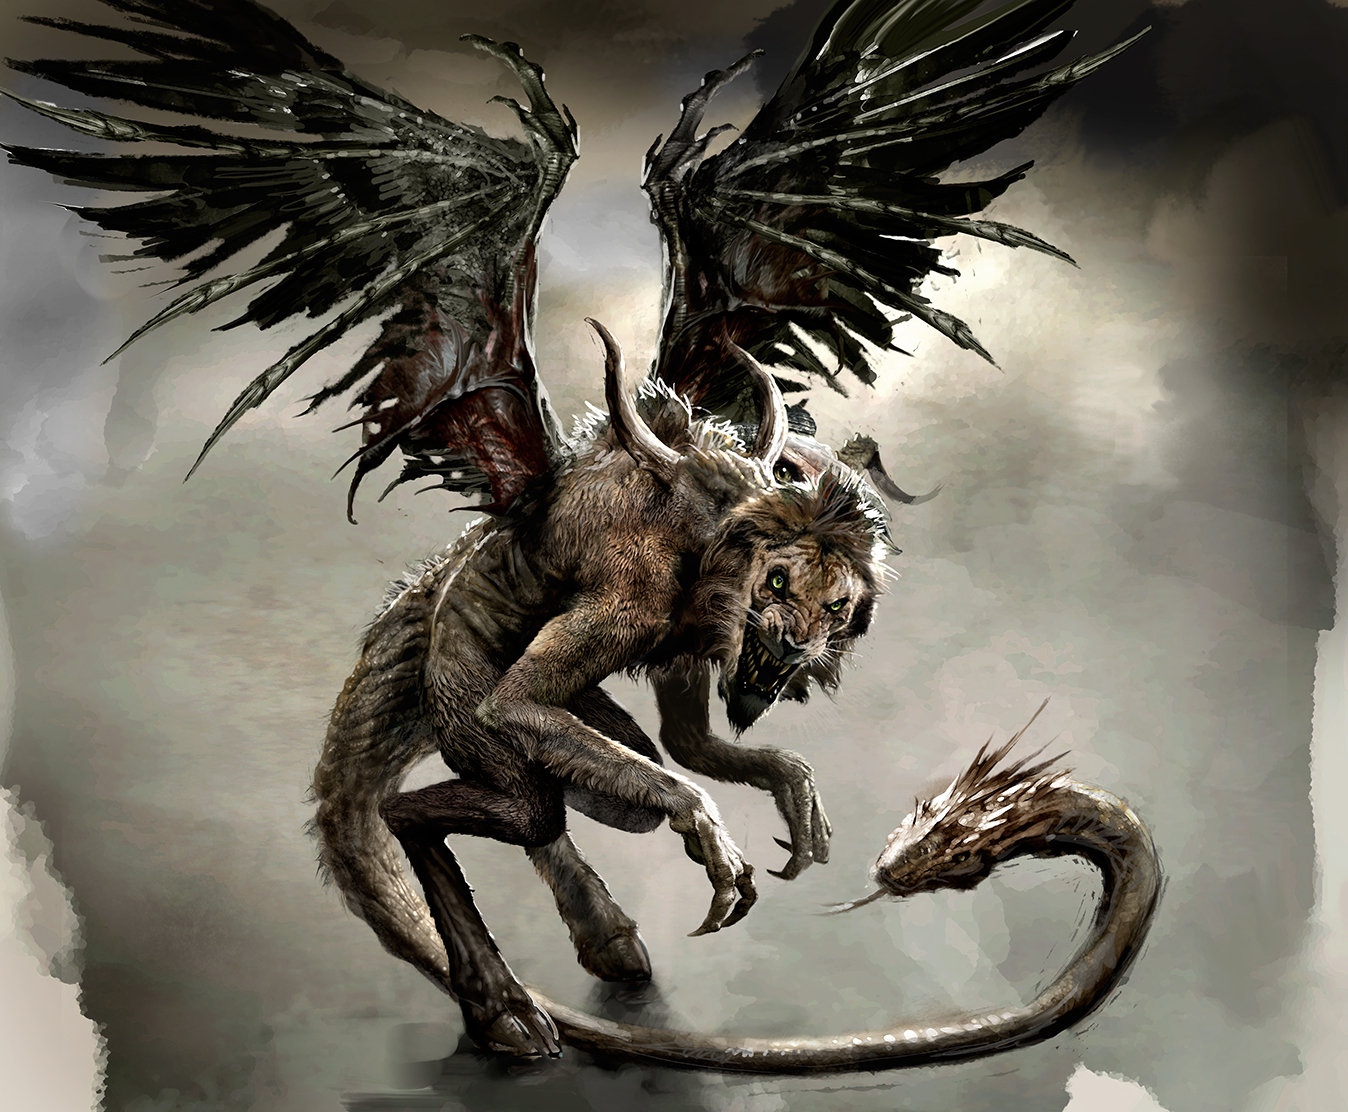 Mythical Creatures: 30 Legendary Creatures From Around the World